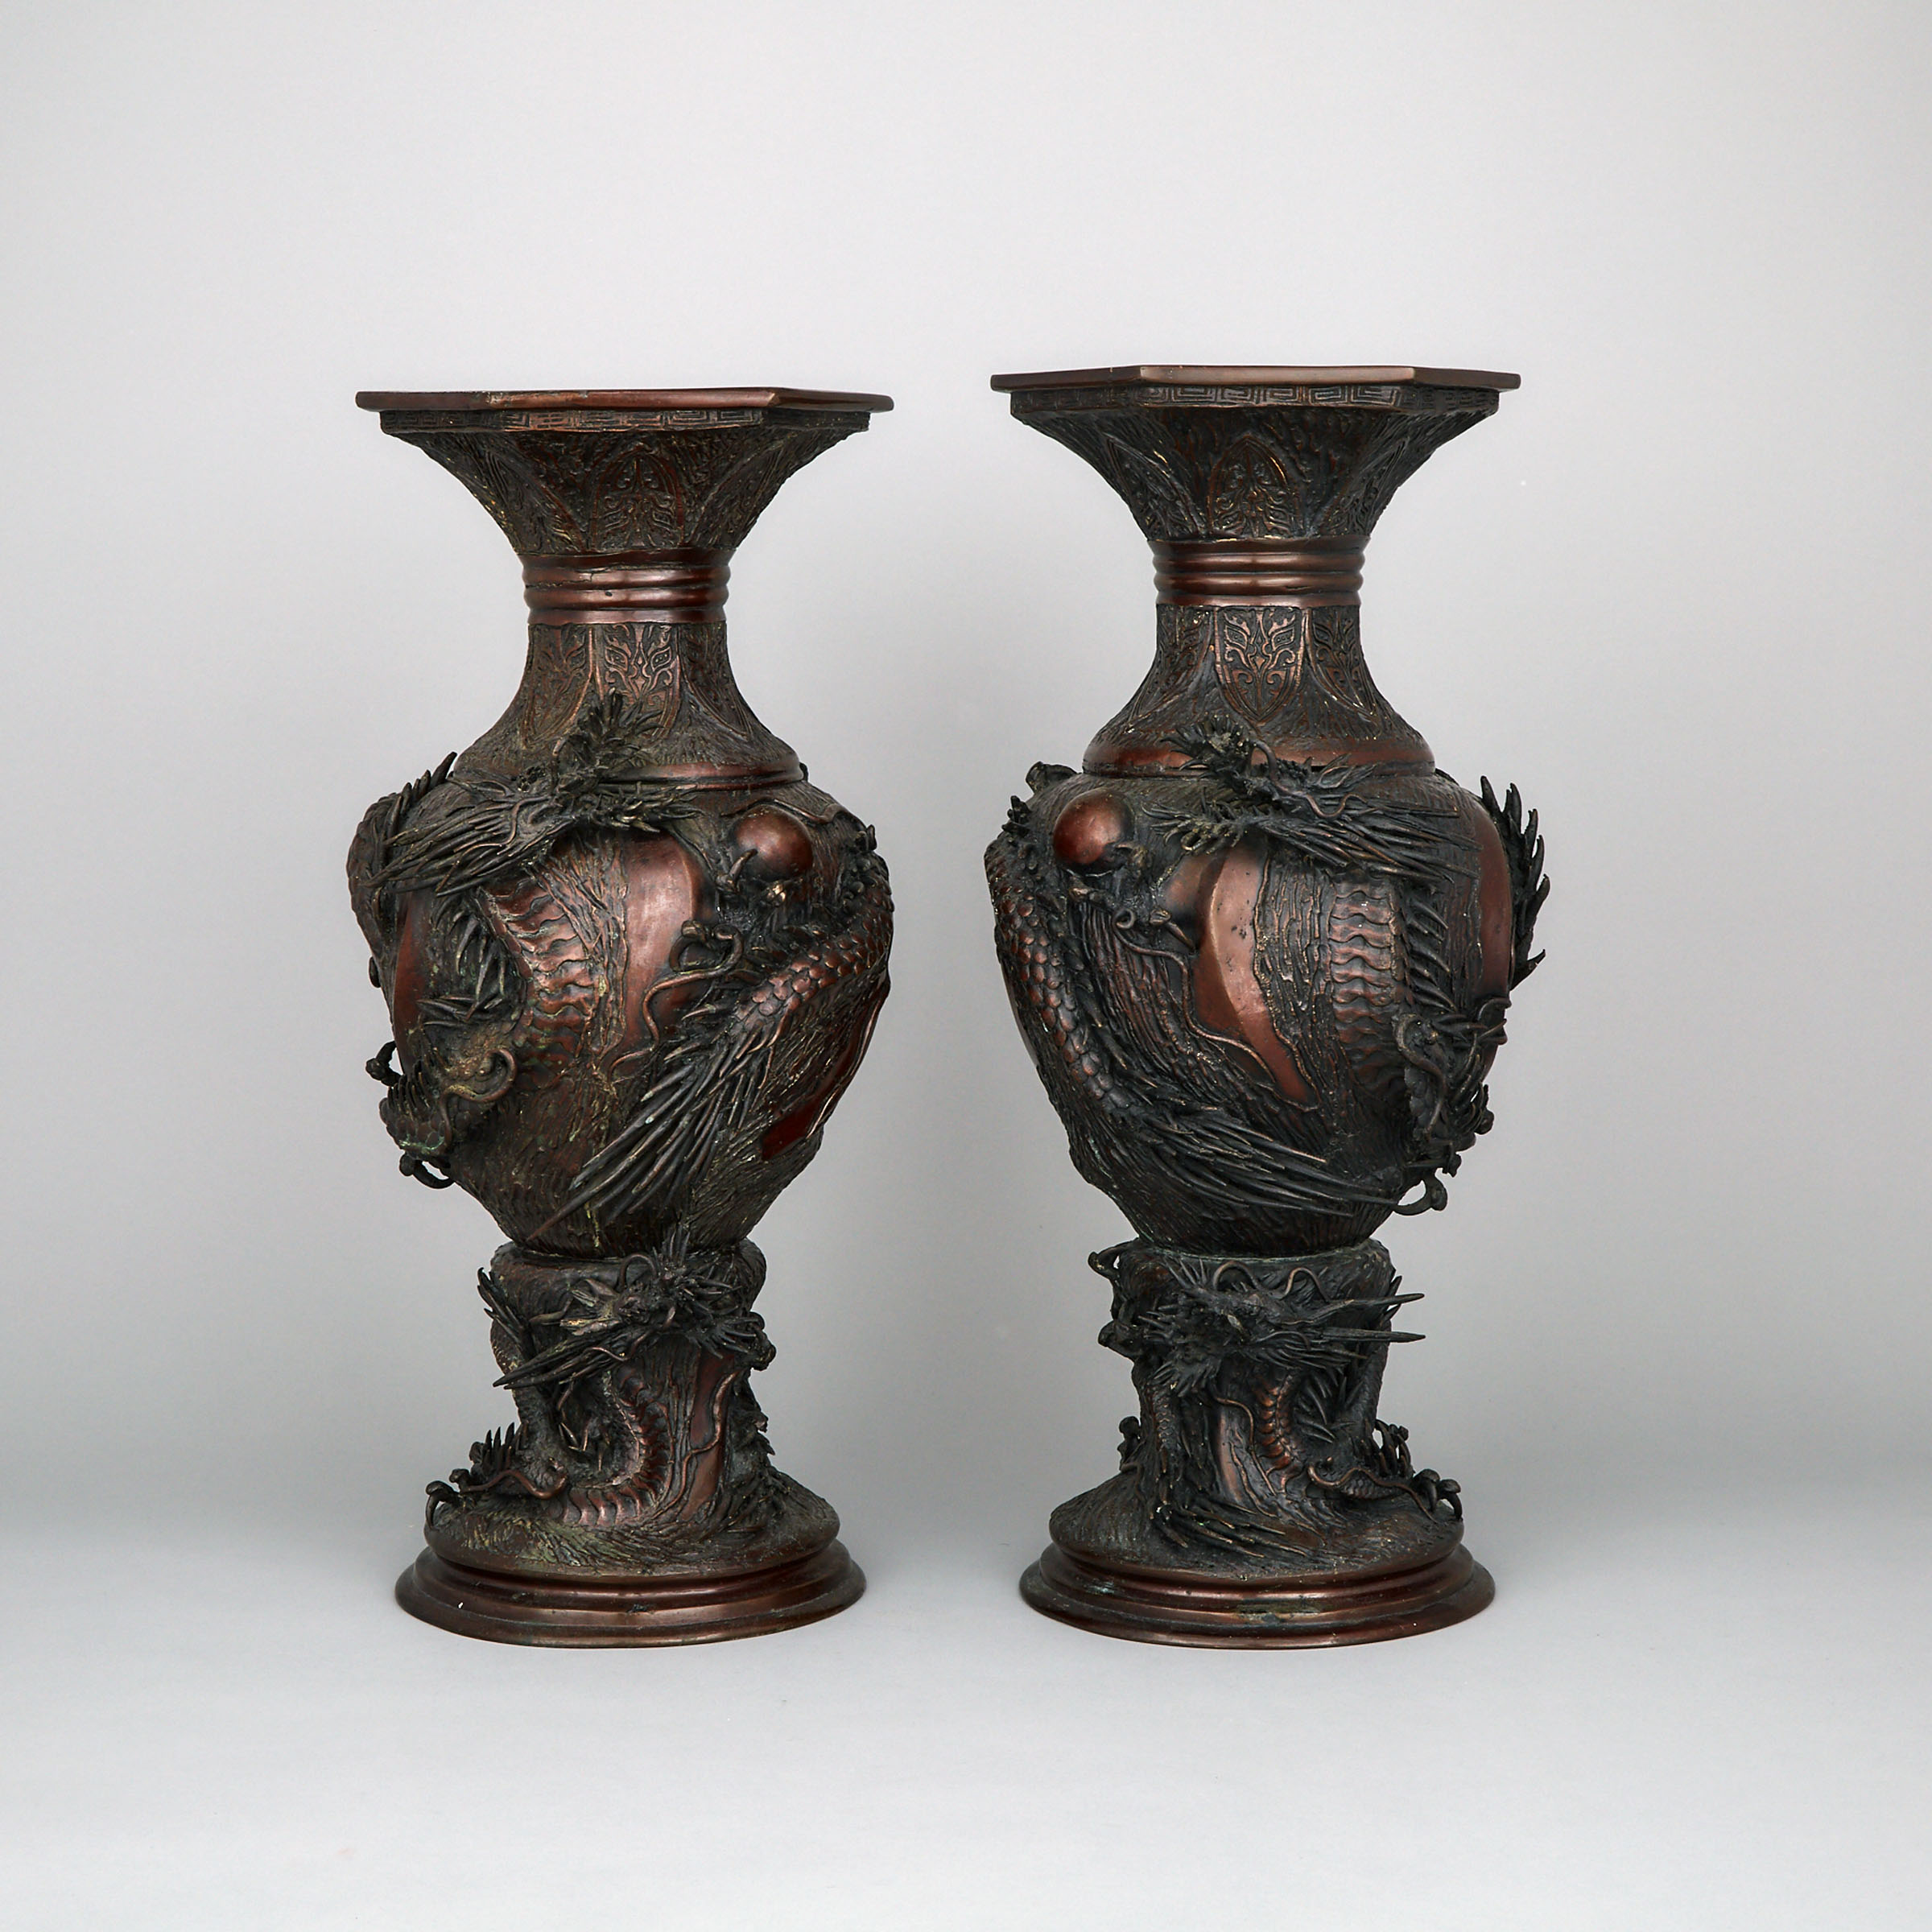 A Pair of Chinese Bronze Floor Vases, Circa 1900